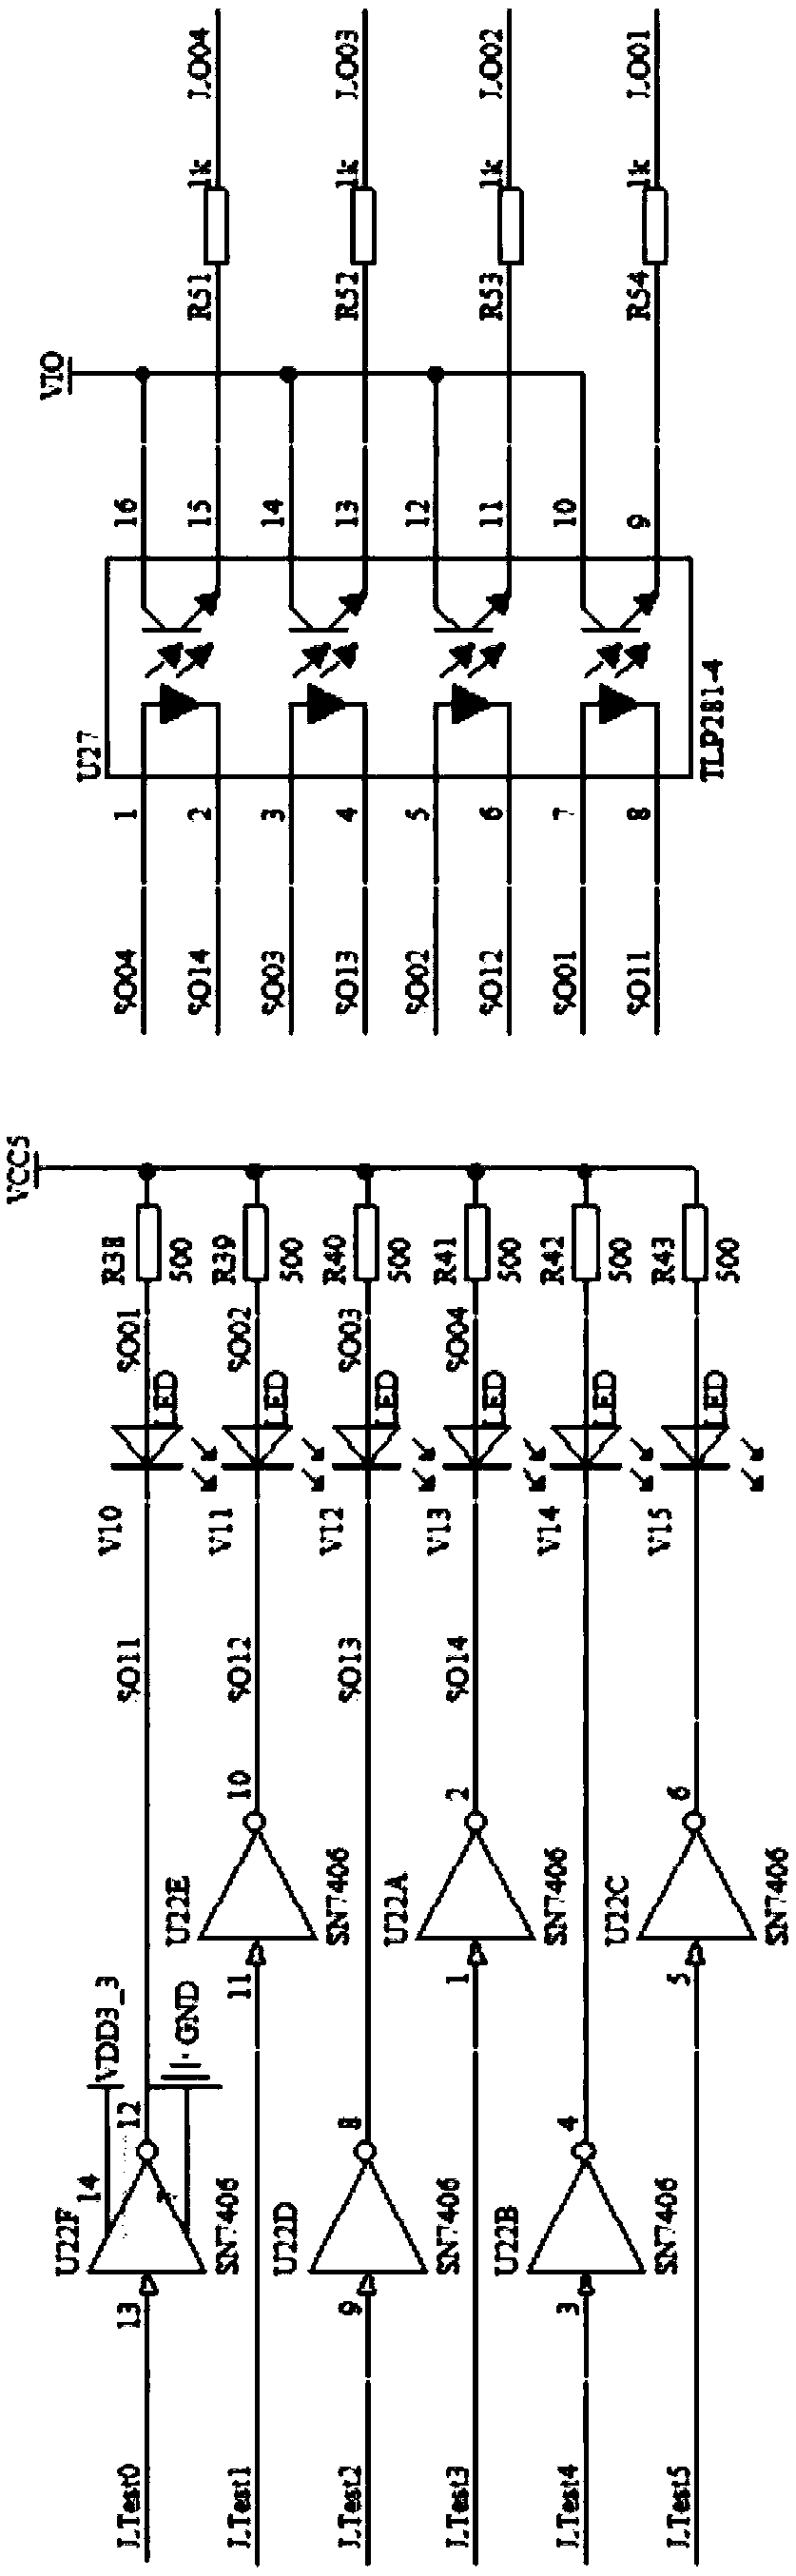 Accelerator control method and system based on programmable gate array FPGA